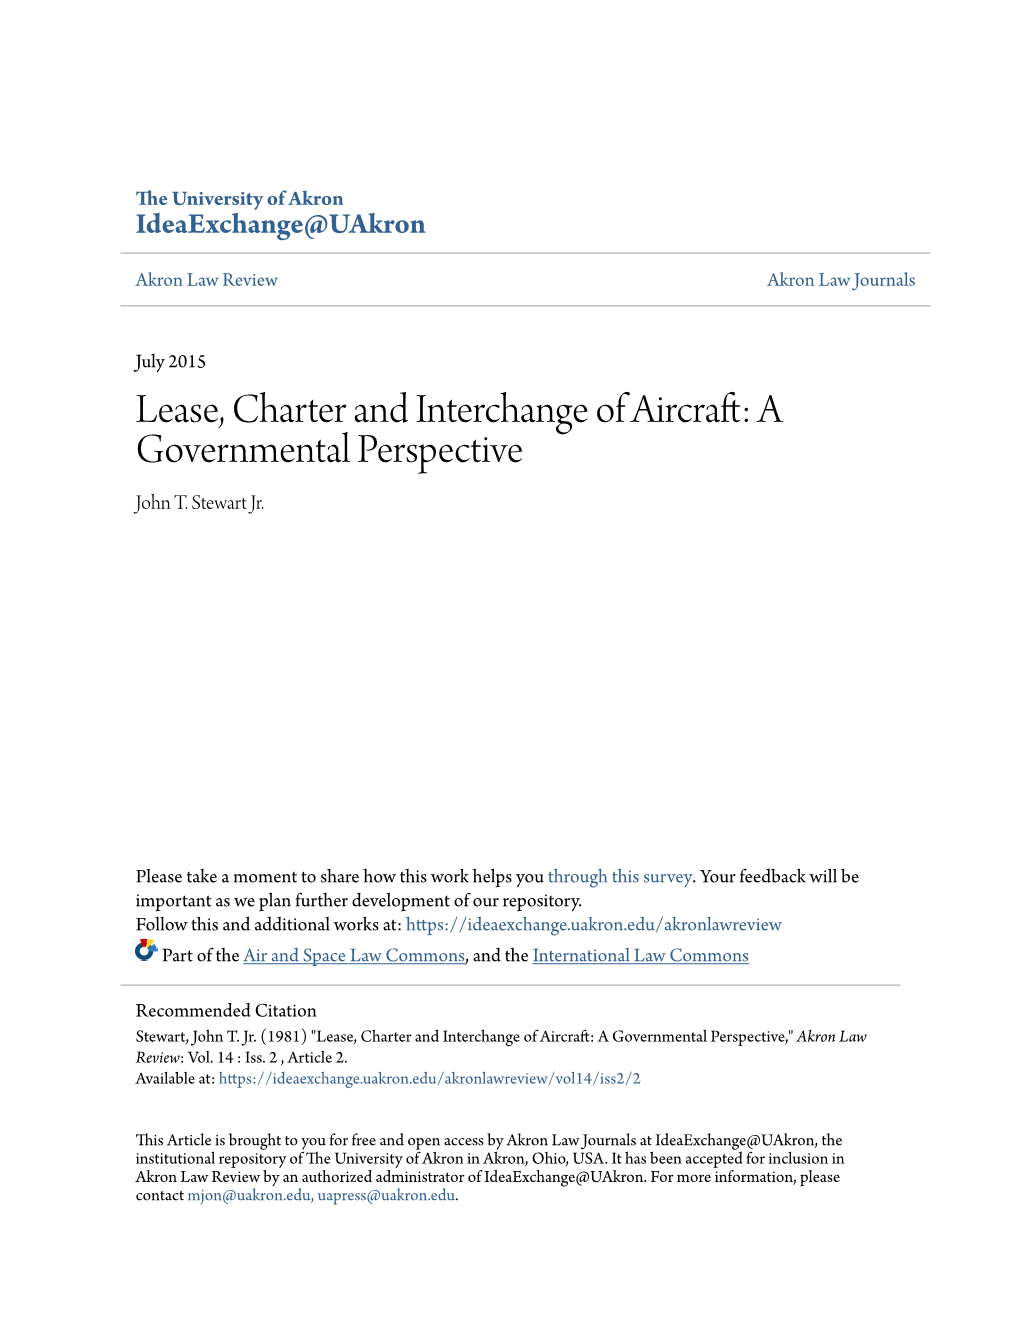 Lease, Charter and Interchange of Aircraft: a Governmental Perspective John T